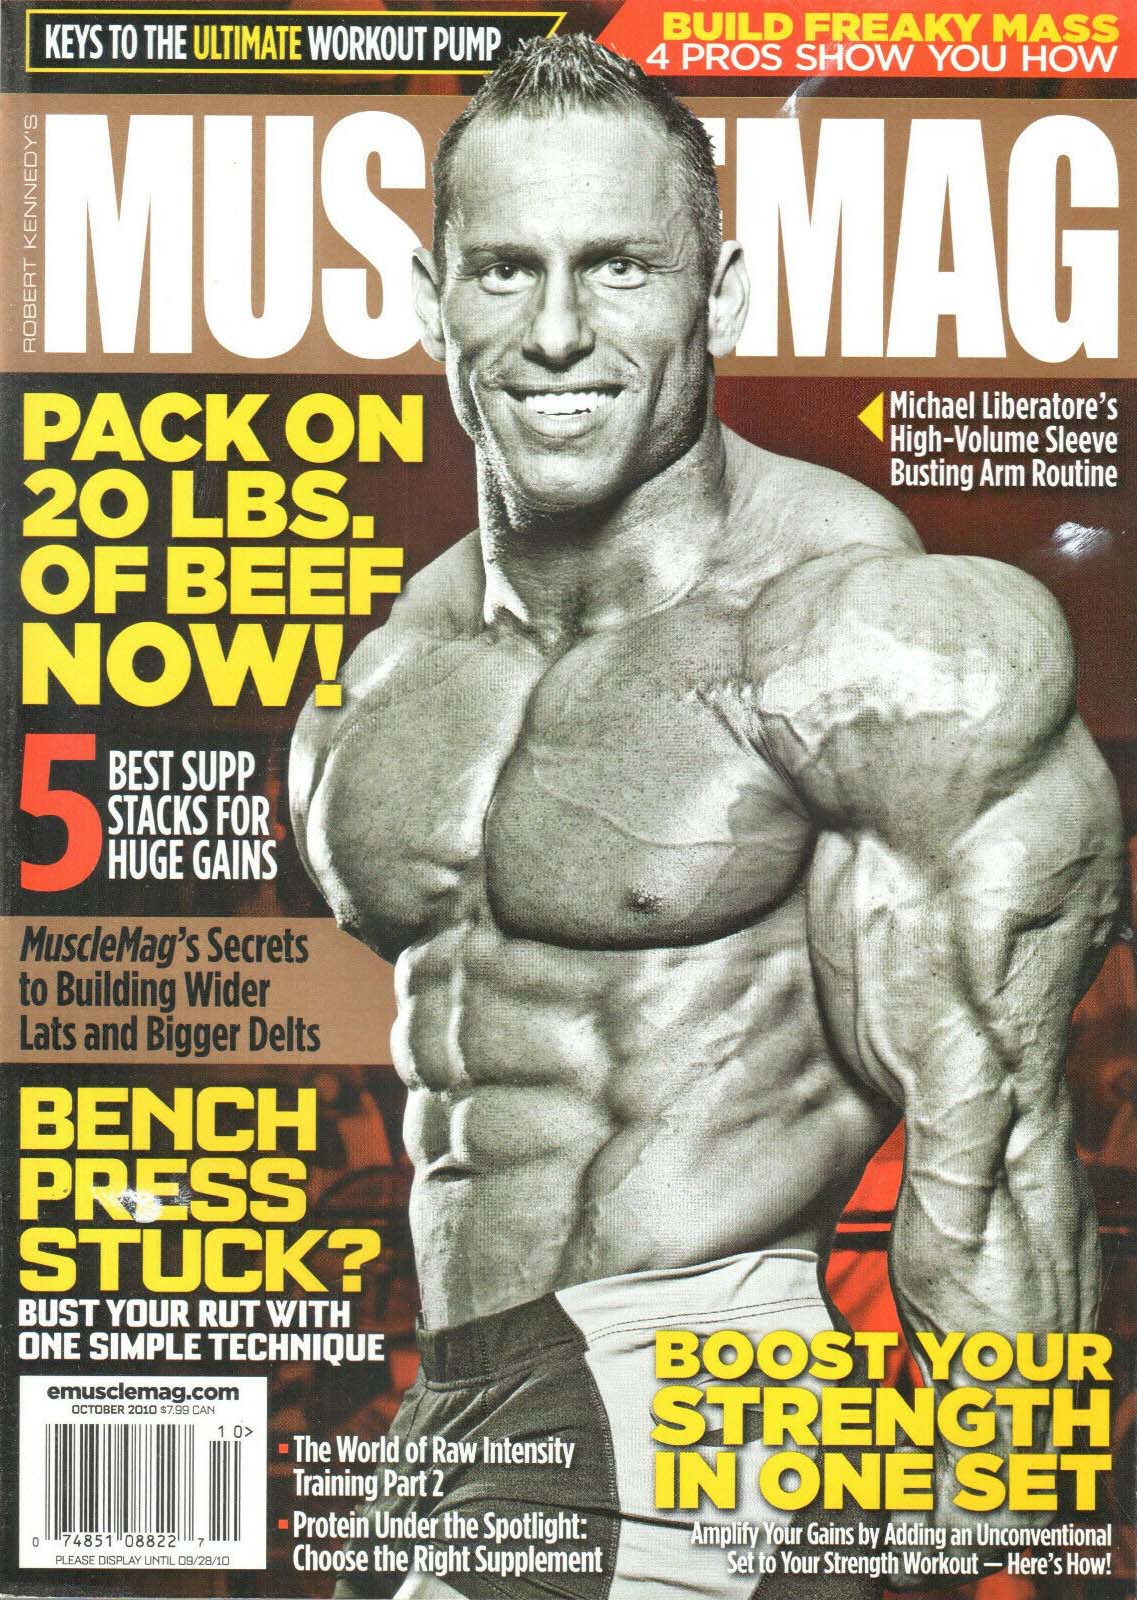 Muscle Oct 2010 magazine reviews